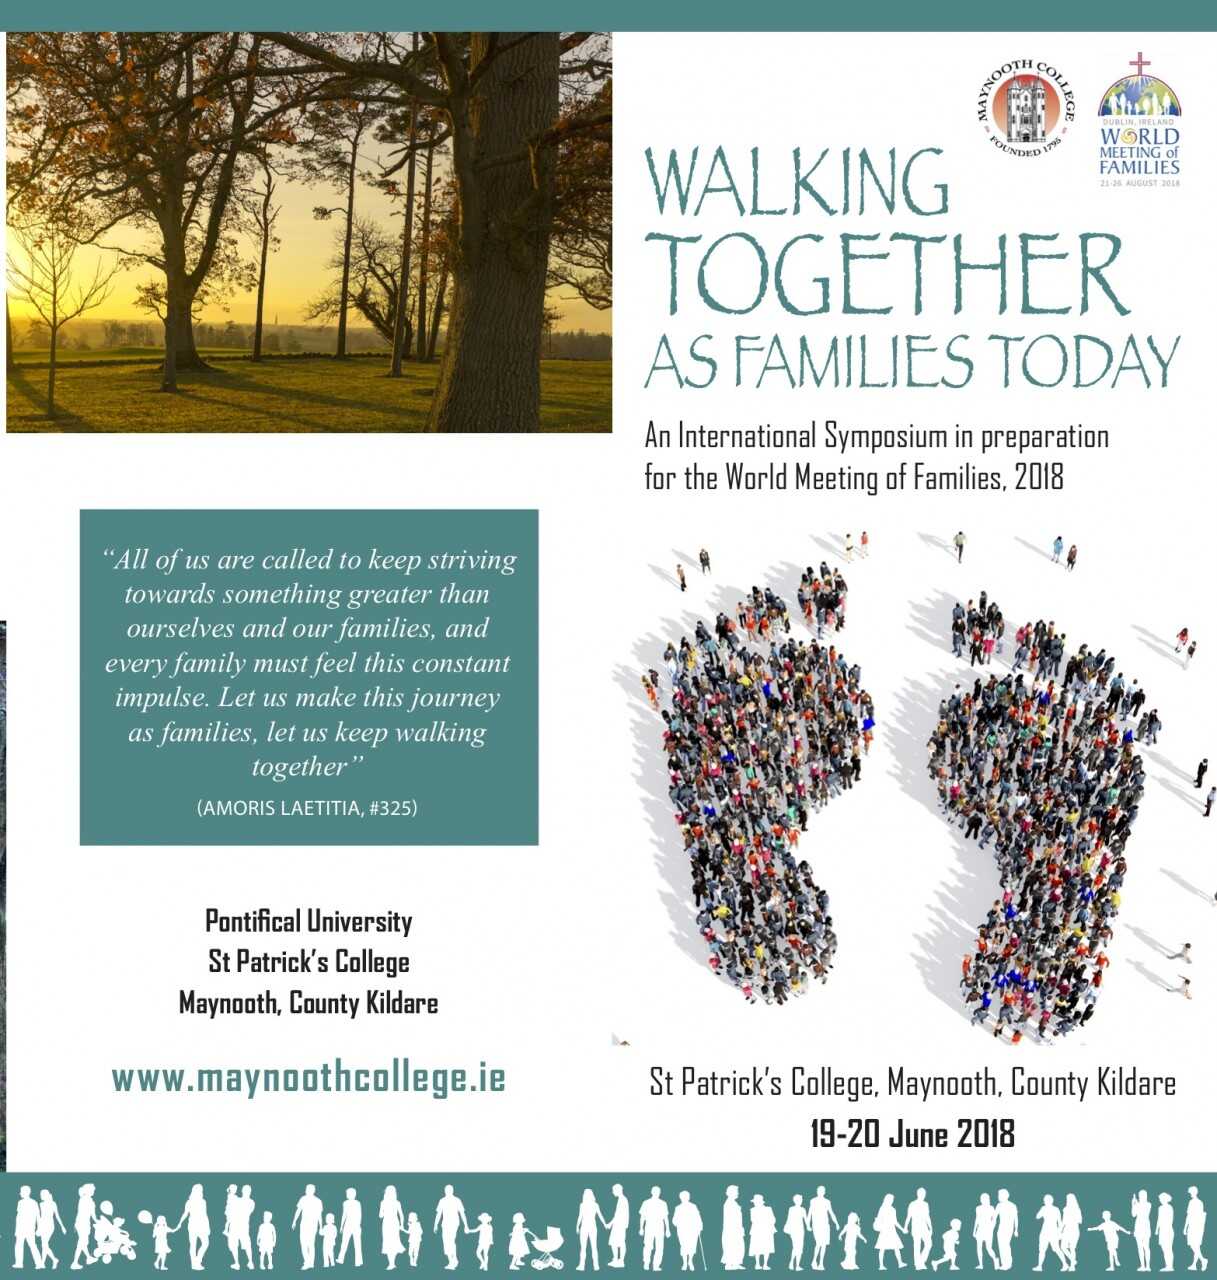 WALKING TOGETHER AS FAMILIES TODAY - 
International Symposium in preparation for the WMOF - St Patrick's College, Maynooth, 19-20 June 2018